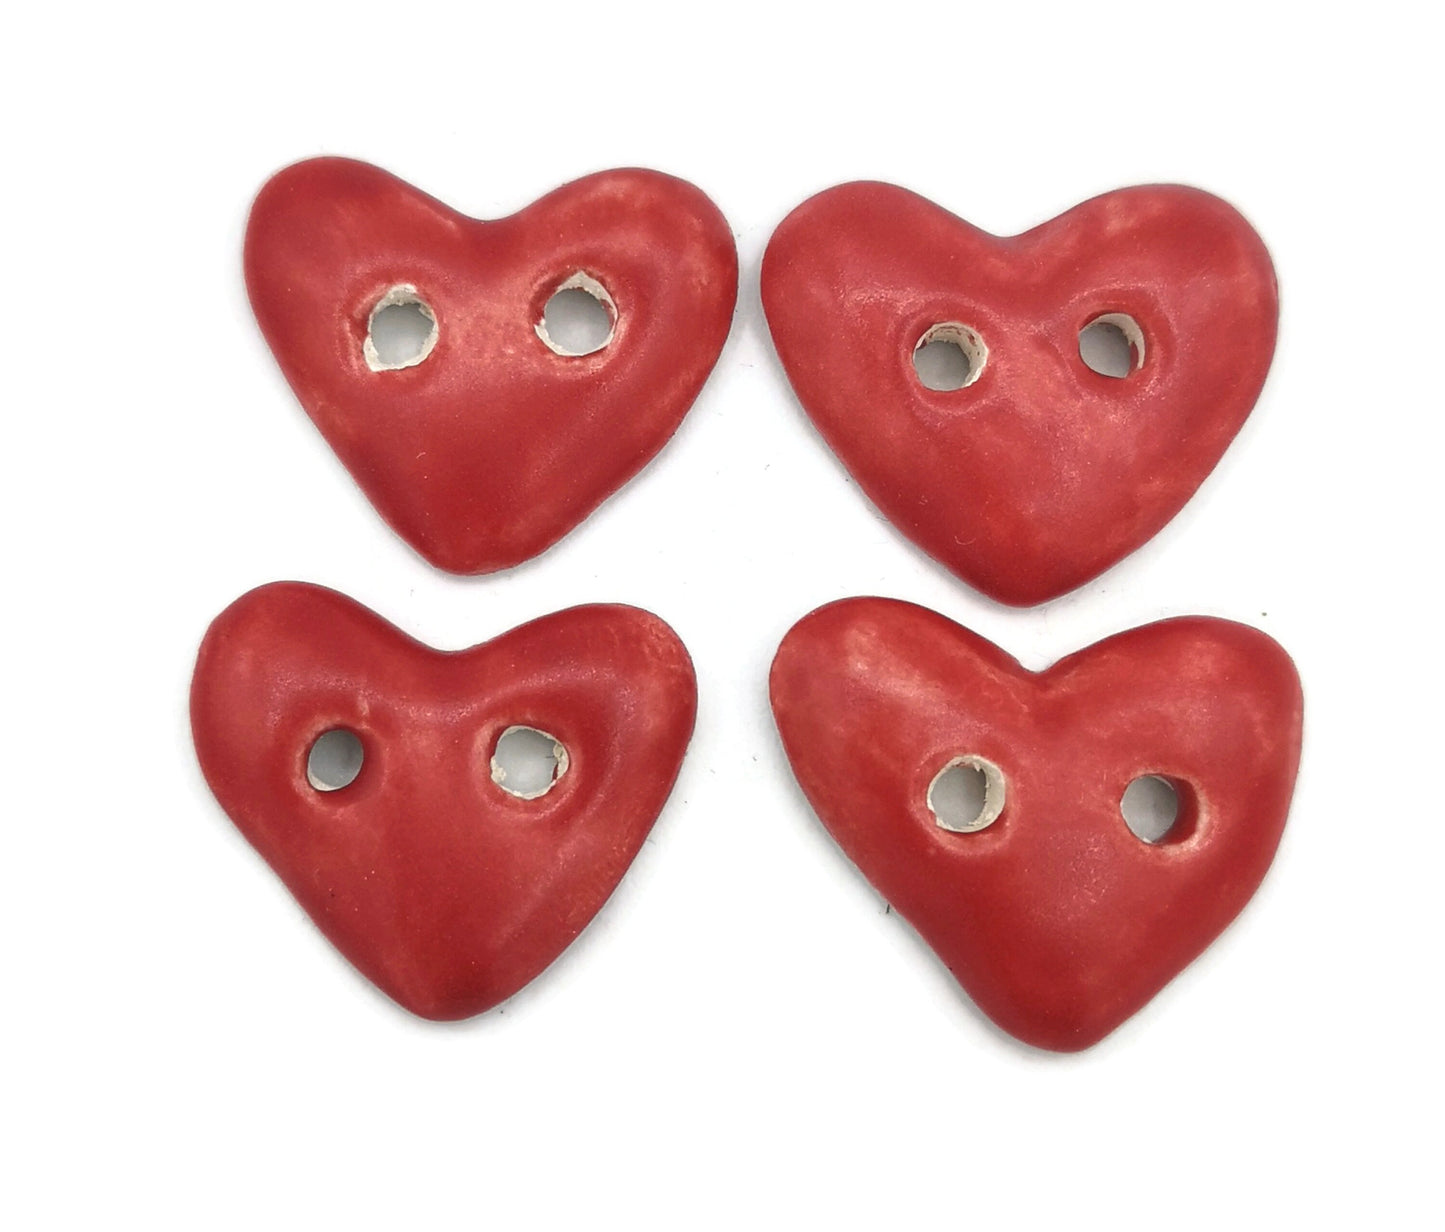 HEART BUTTON, NOVELTY Sewing Buttons, Set Of 4 Heart Shaped Buttons For Crafs, Ventines Day Decor - Ceramica Ana Rafael